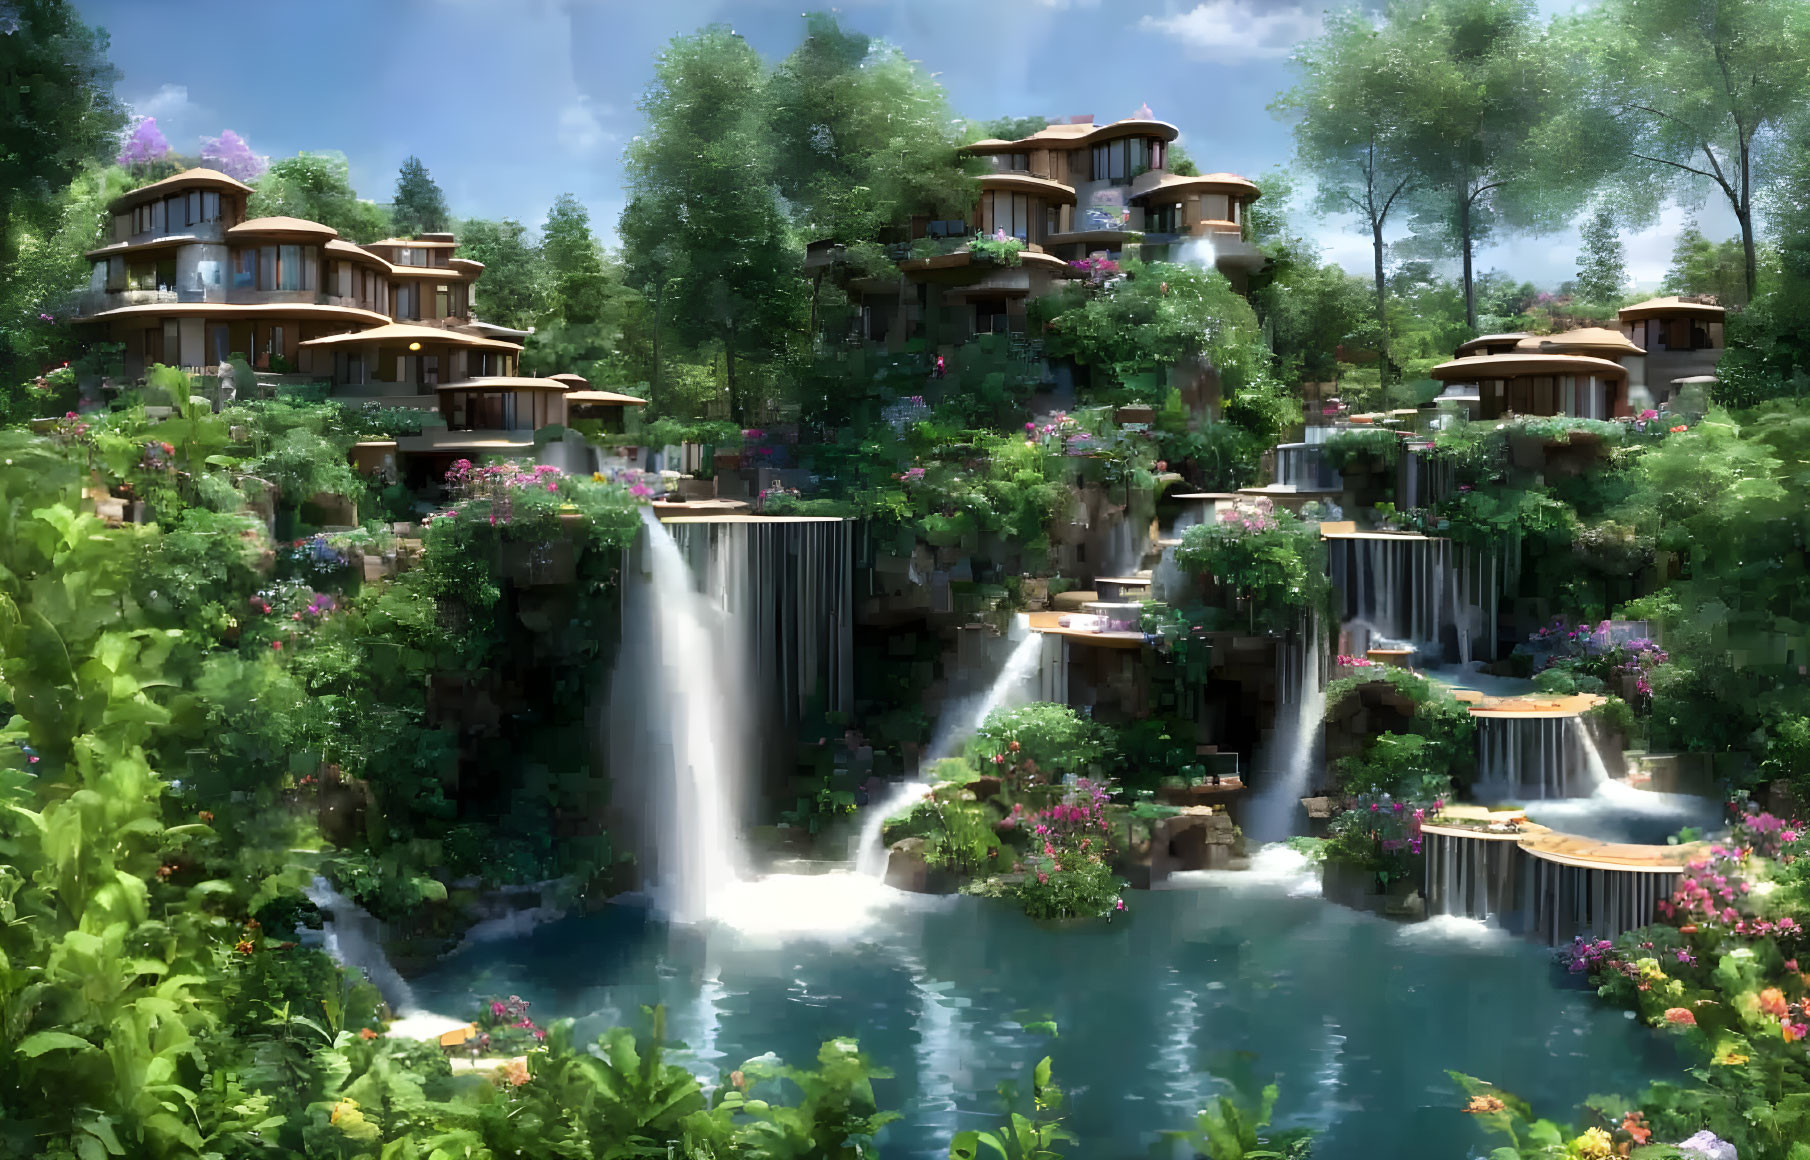 Tranquil waterfalls and fantasy houses in lush greenery